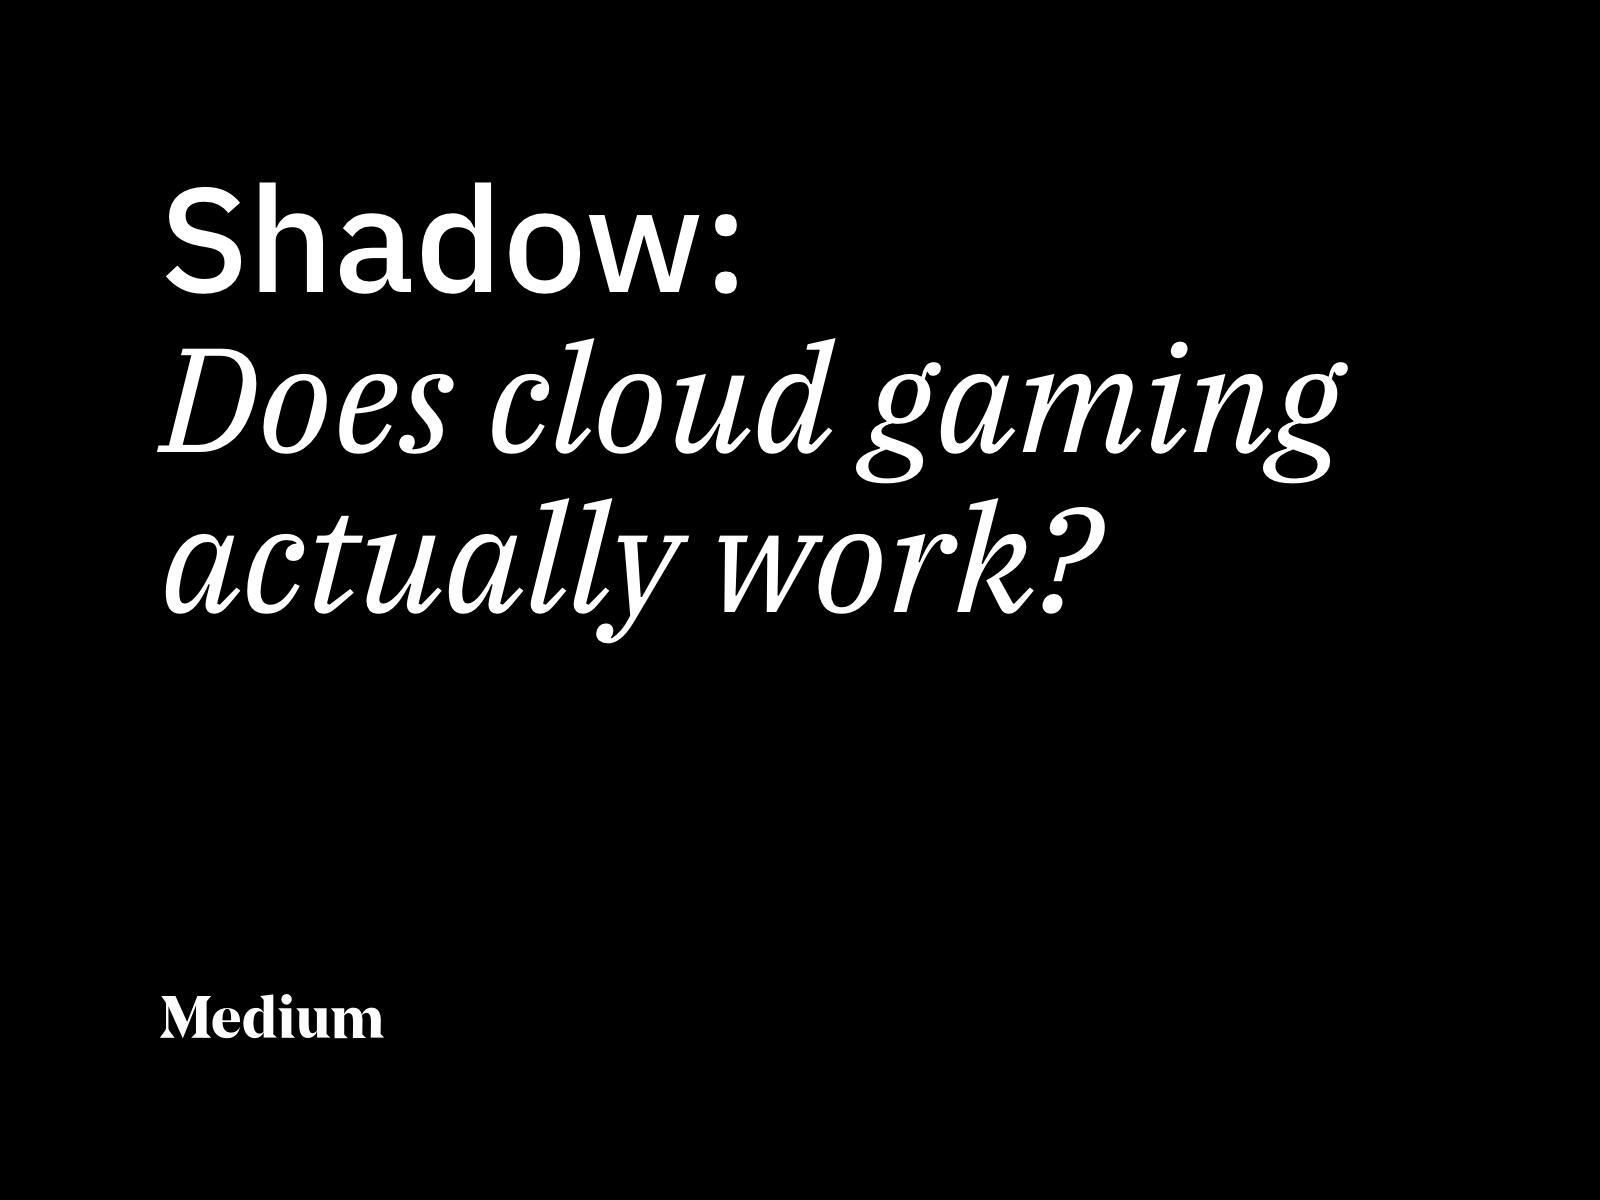 Shadow: Does cloud gaming actually work?